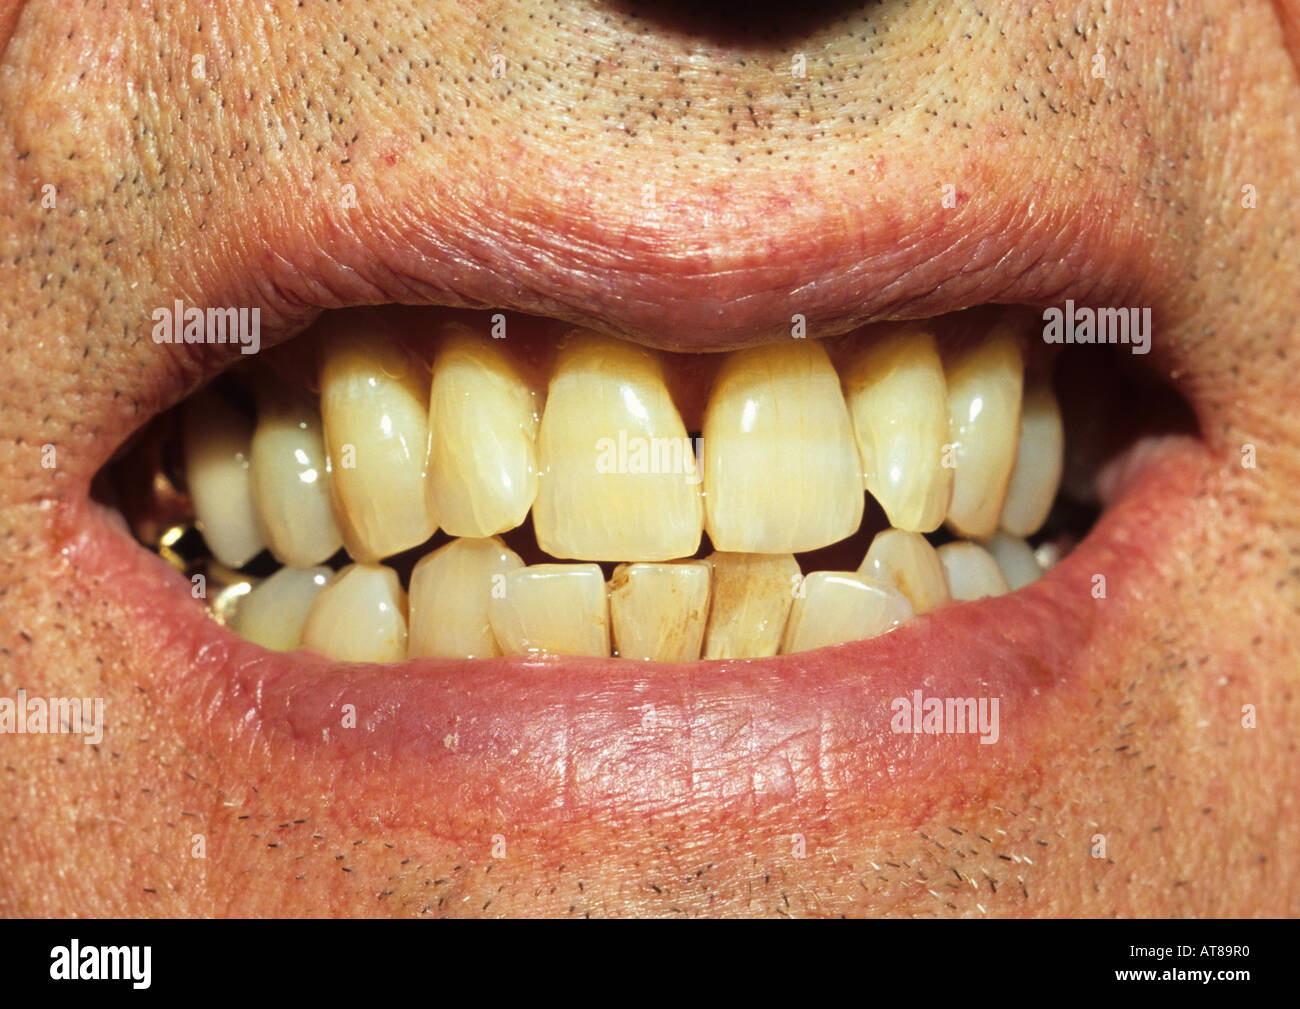 yellowest teeth in the world